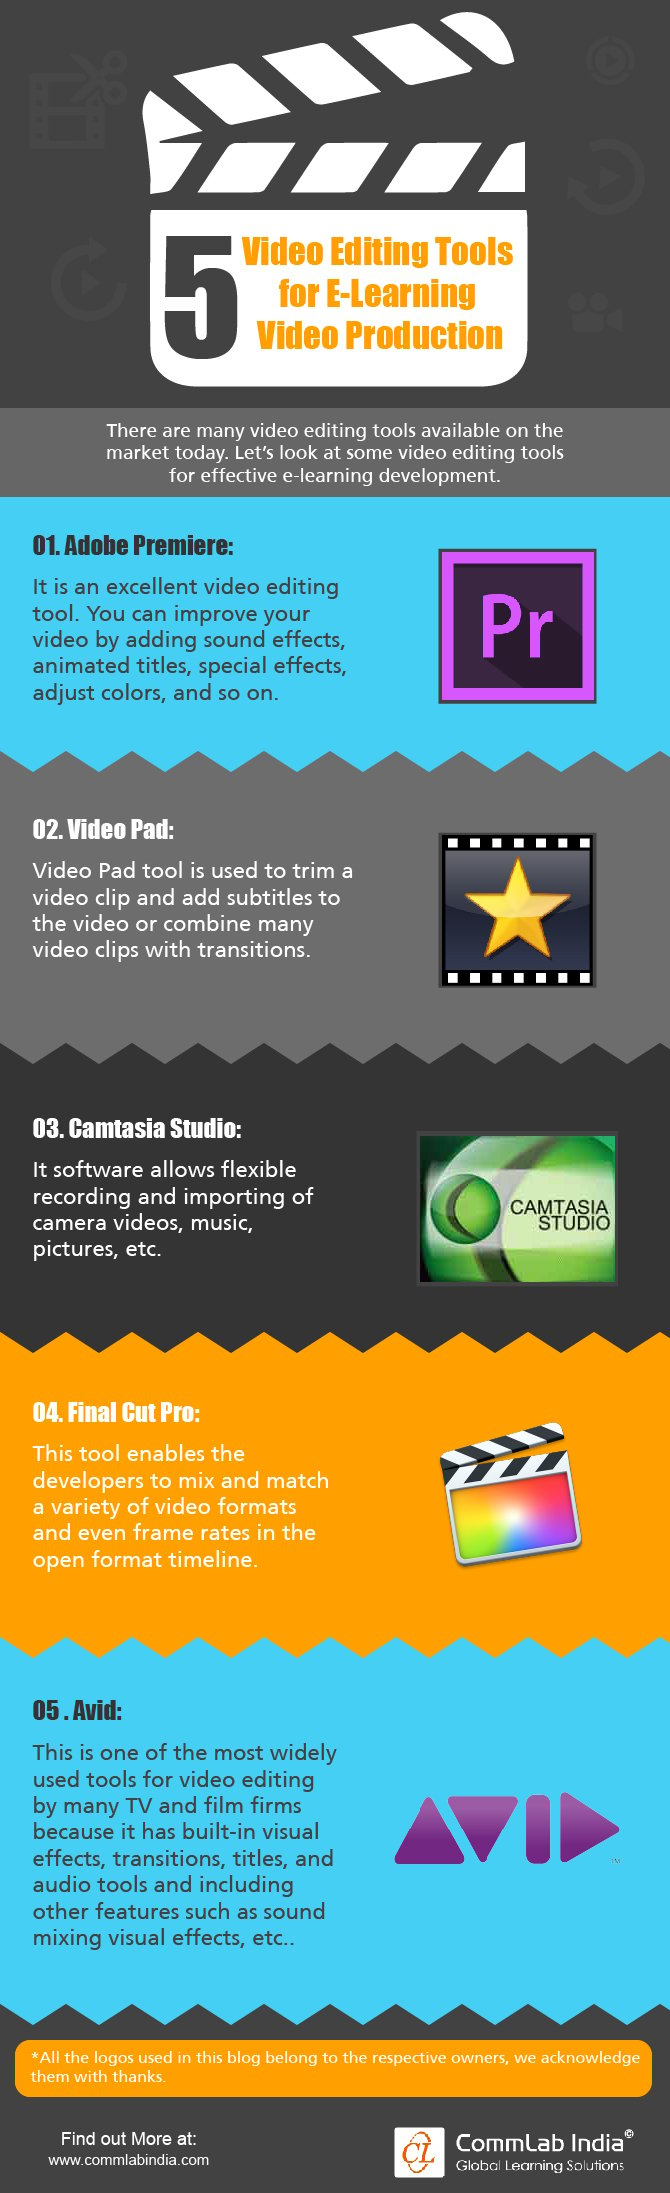 5 Video Editing Tools for eLearning Video Production [Infographic]